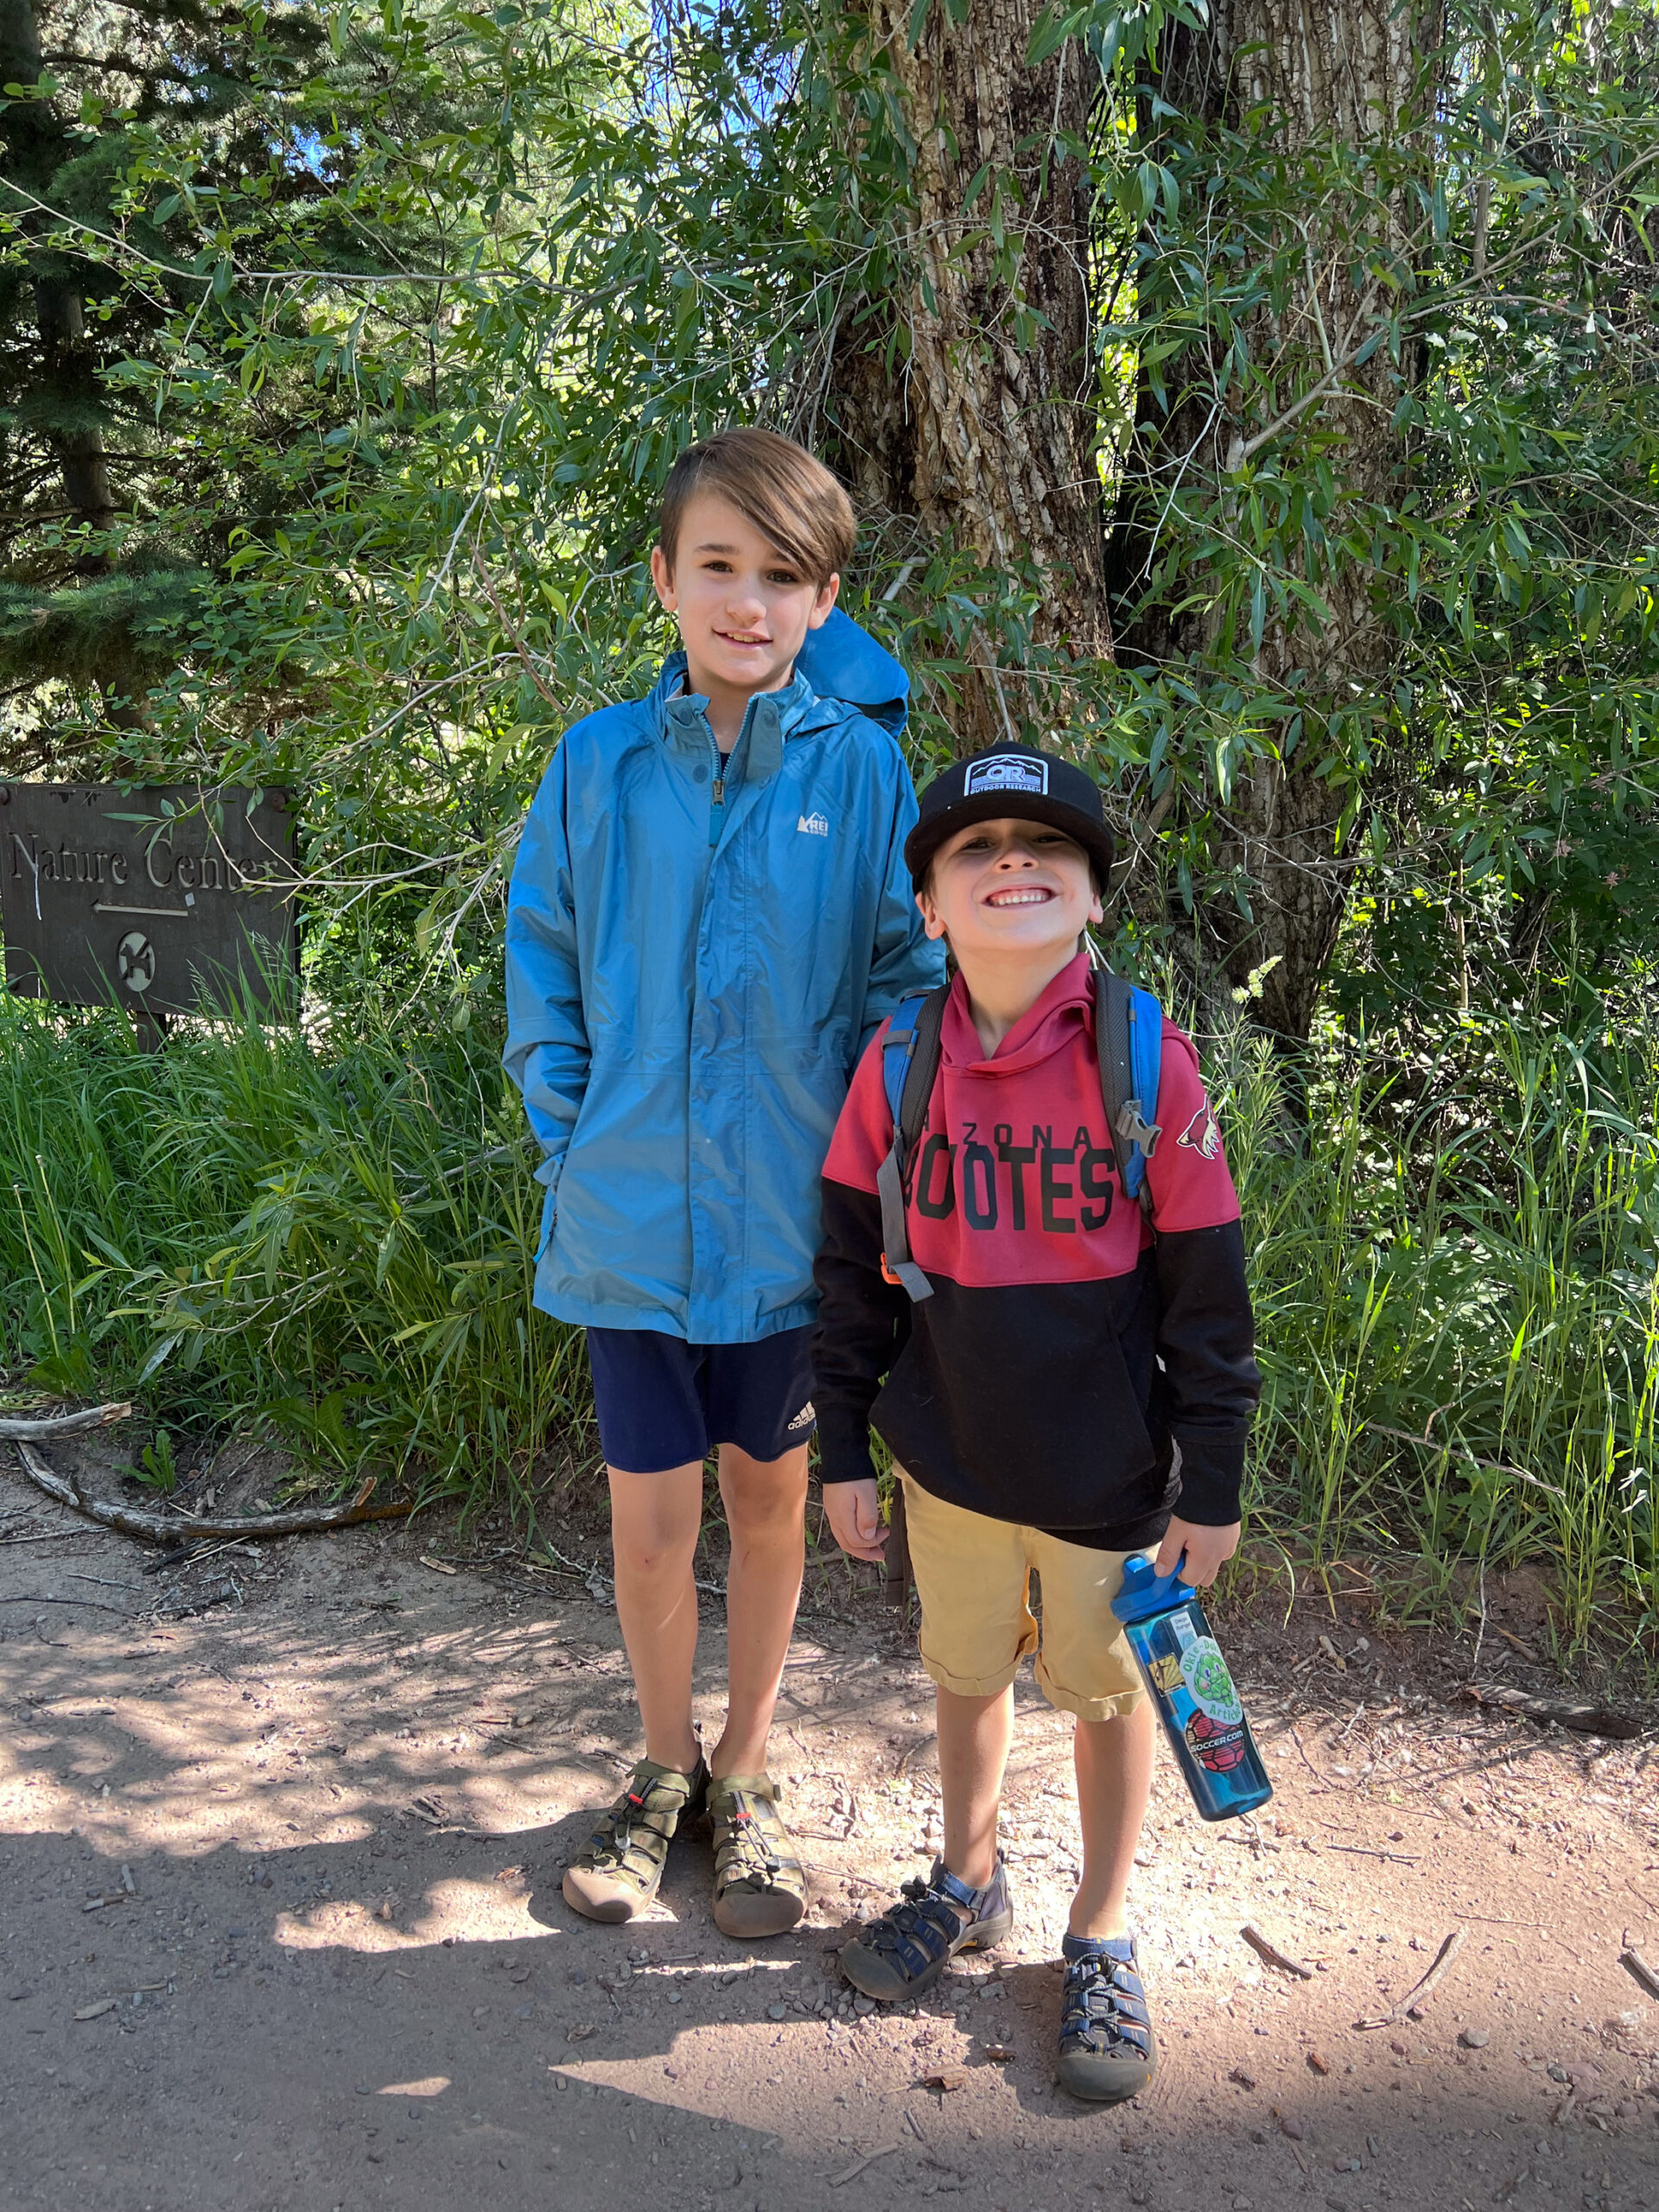 my boys ready for summer camp at ACES (Aspen Center for Environmental Sciences). You can visit this amazing outdoor nature preserve in Aspen anytime! #aspenco #travelwithkids #familytravel